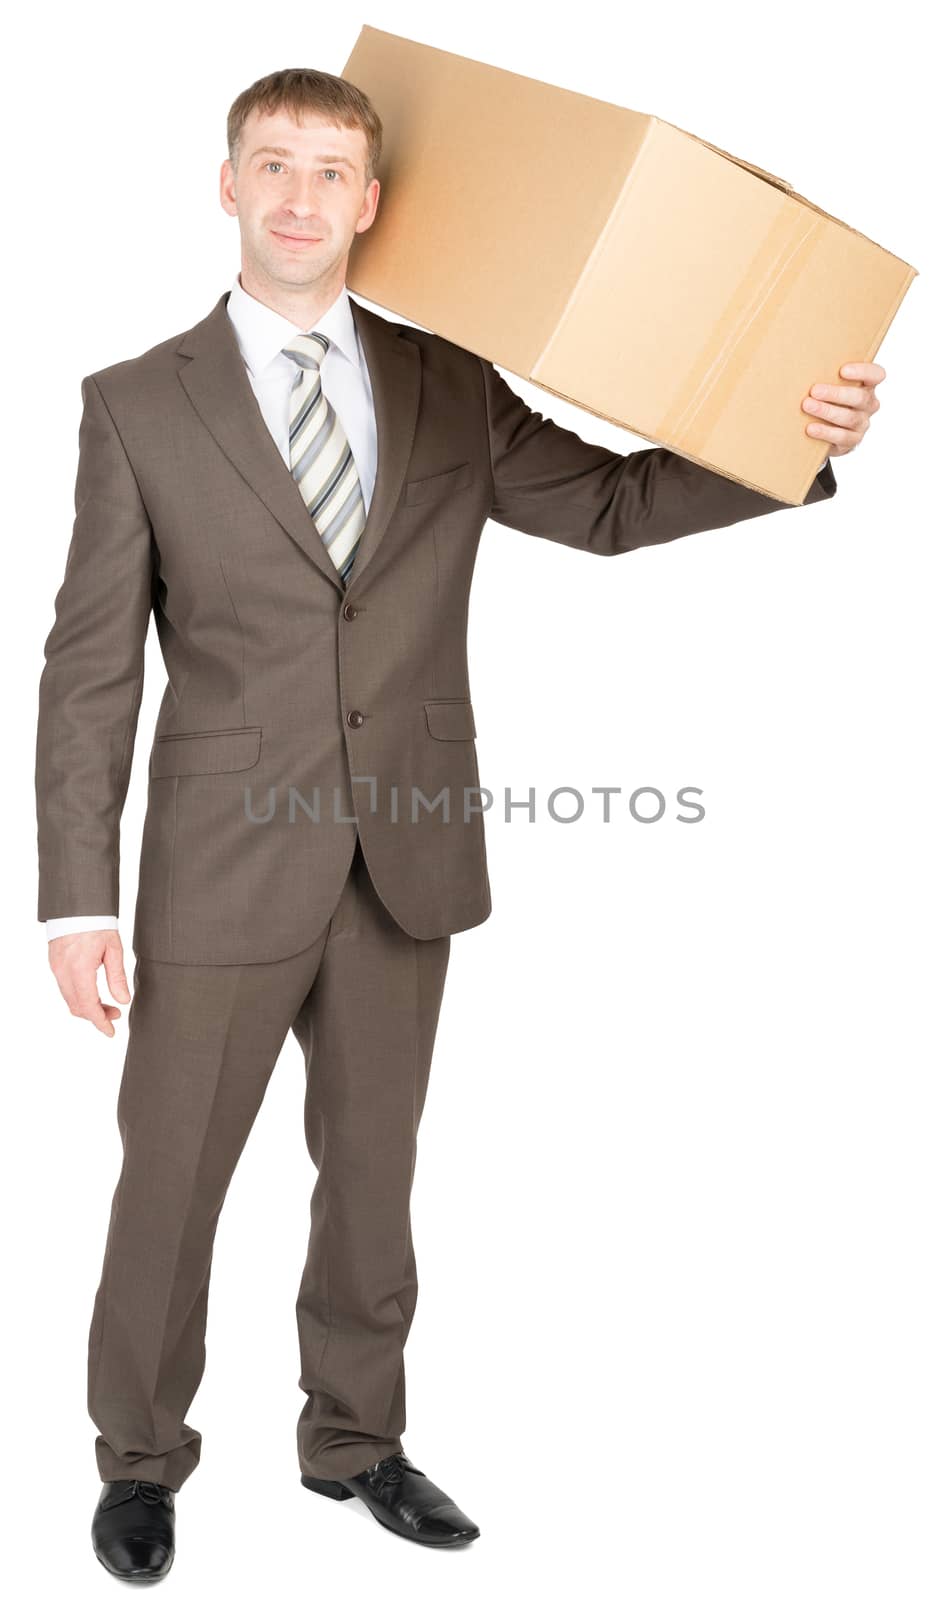 Young courier with carton box on shoulder. Looking at camera. Isolated on white background